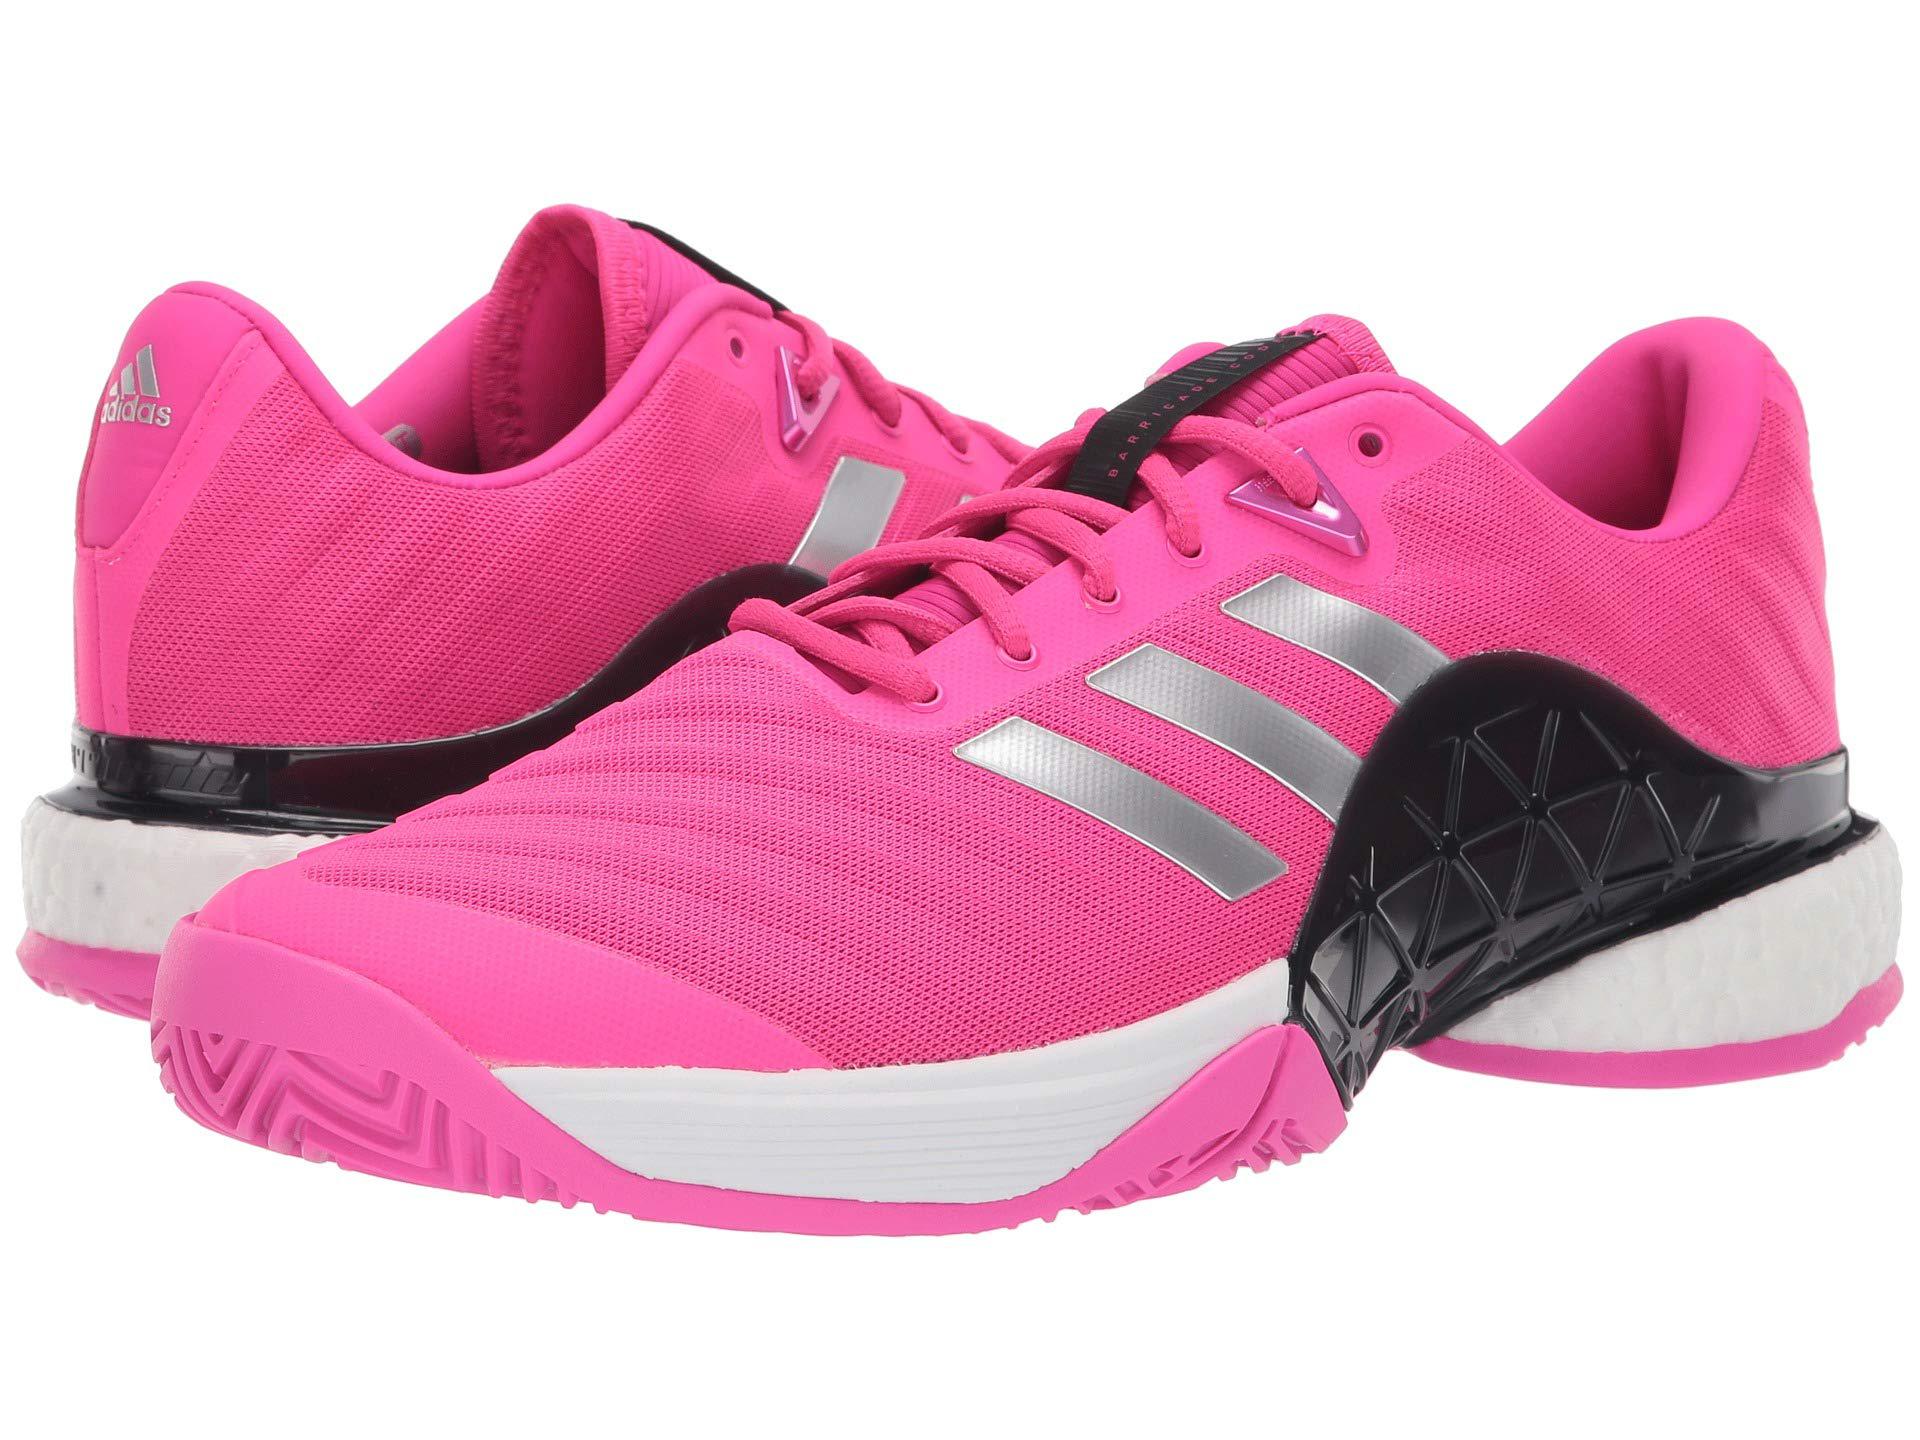 adidas Synthetic Barricade 2018 Boost (shock Pink/matte